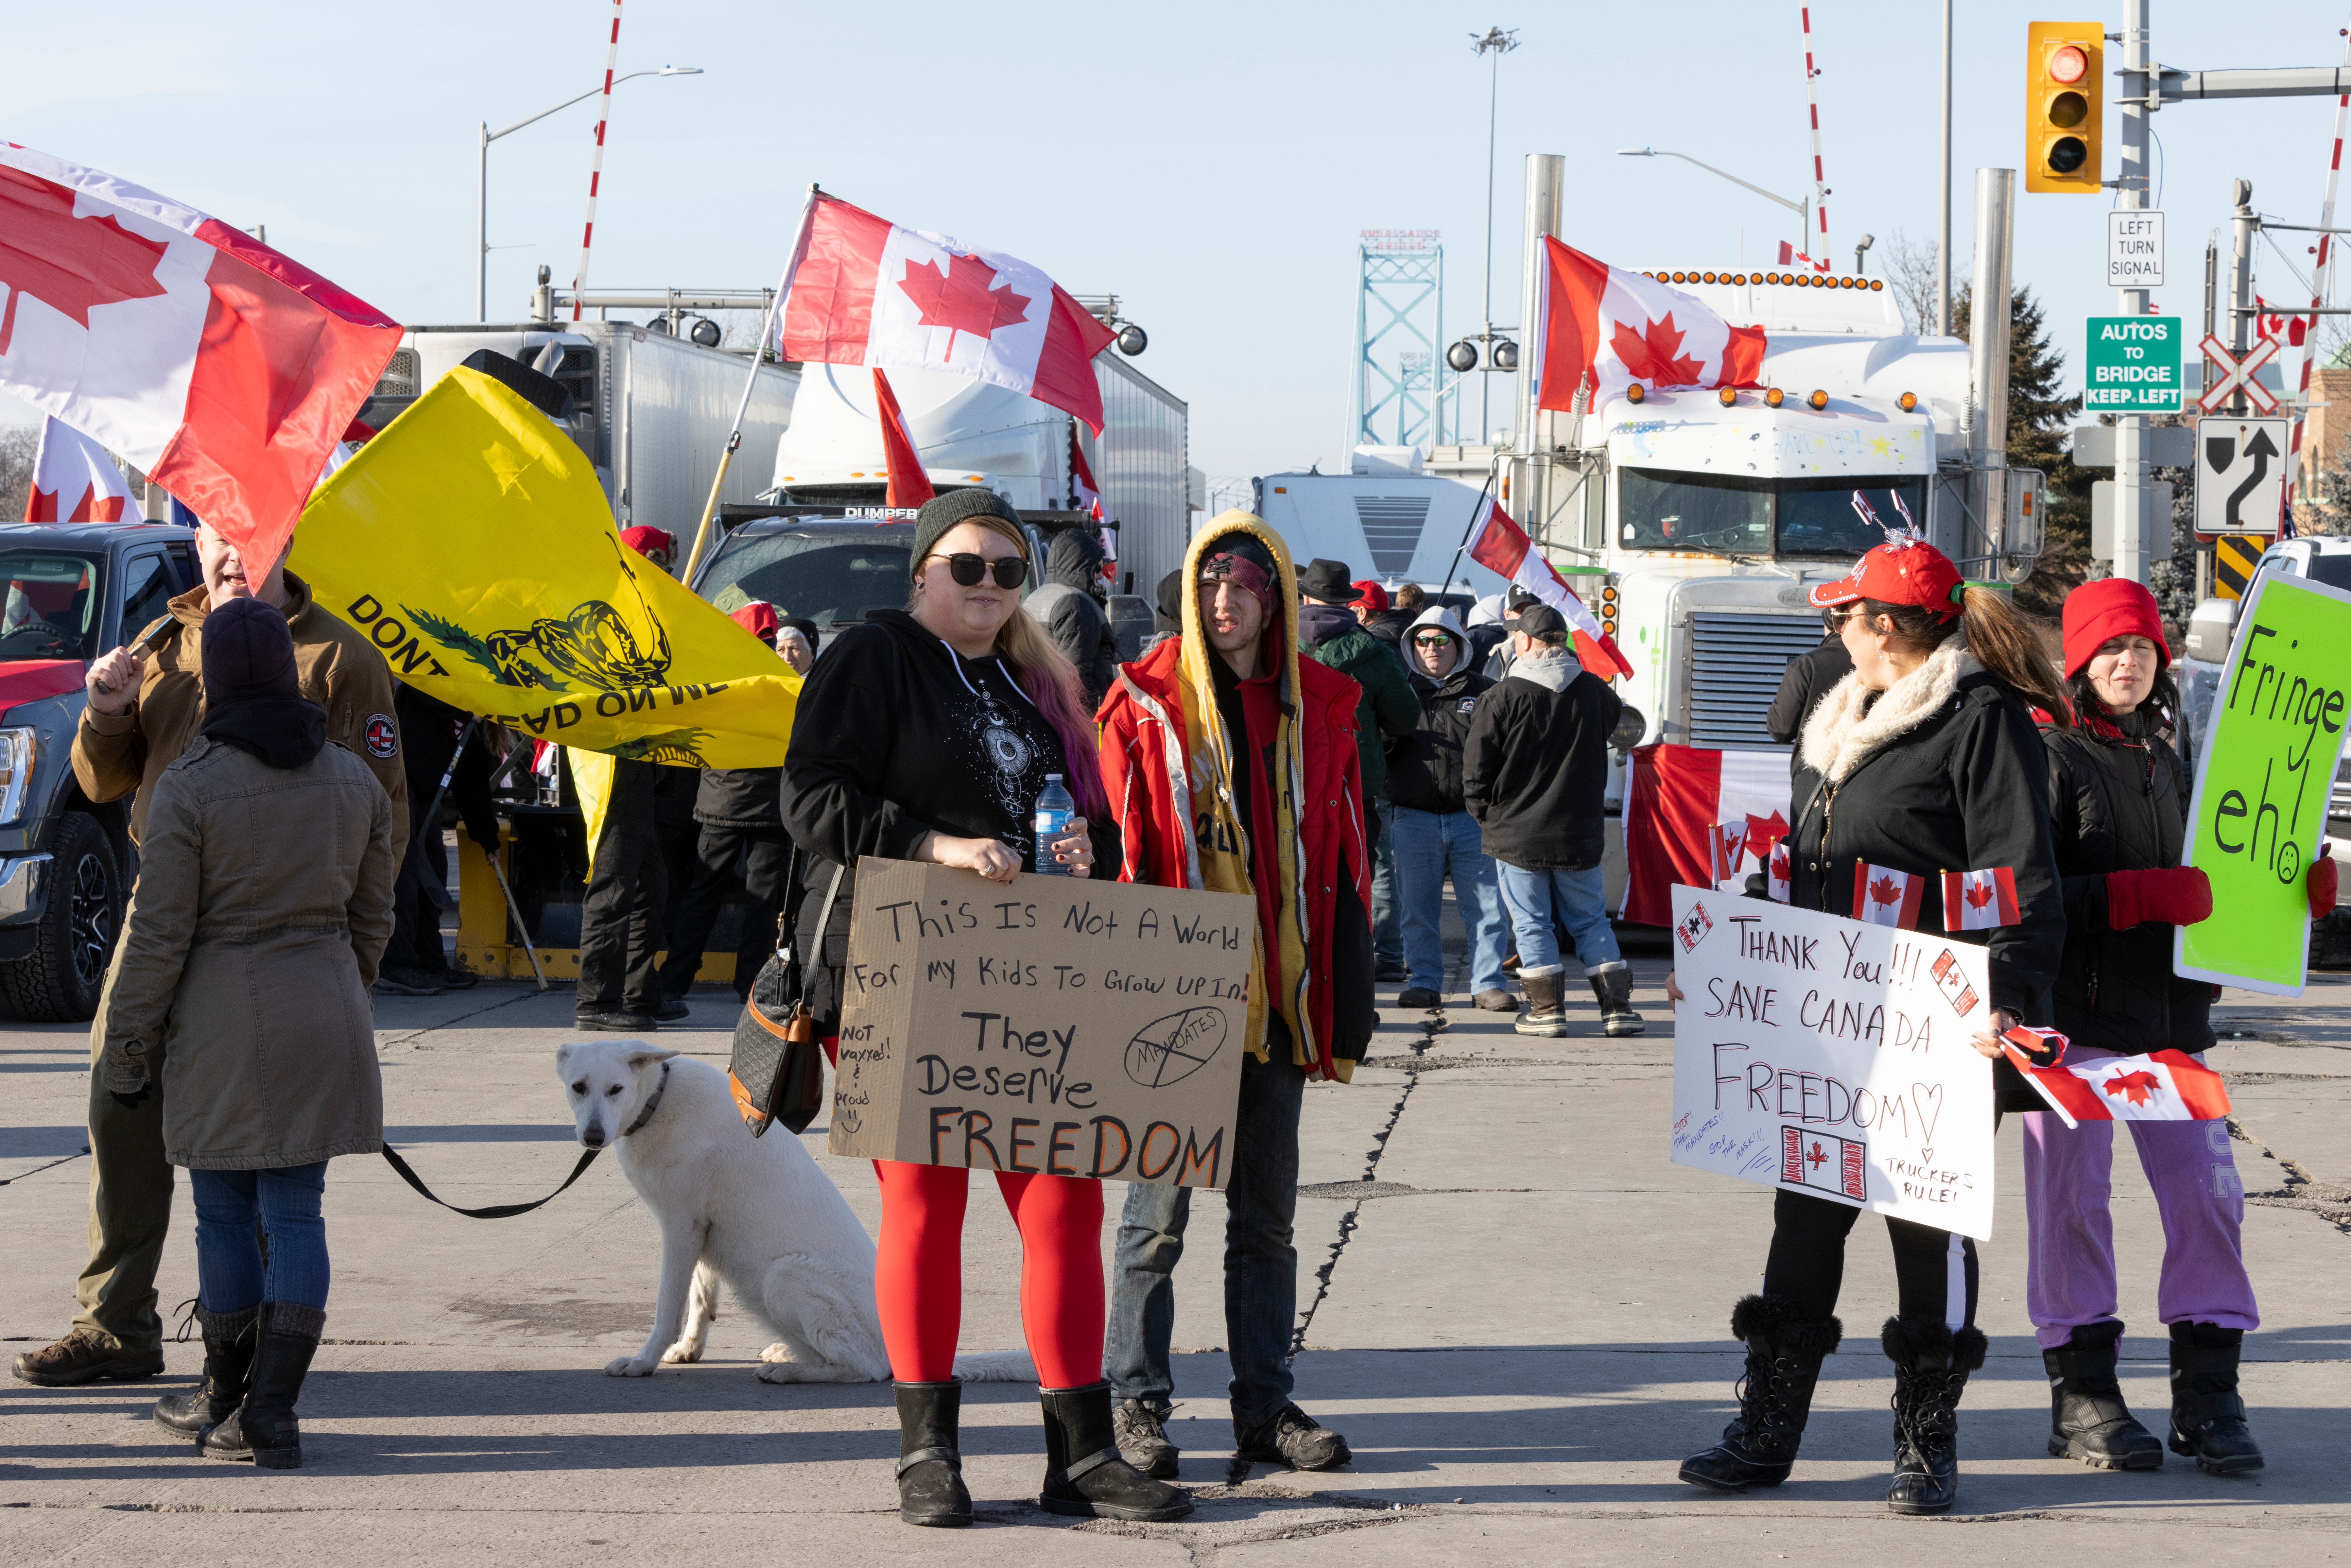 Protestors block traffic at the Ambassador Bridge, linking Windsor, Ontario and Detroit on Wednesday, Feb. 9, 2022. The demonstration in solidarity with protests in Ottawa against COVID-19 restrictions has blocked traffic into Canada on the Ambassador Bridge linking Windsor and Detroit since Monday and is the the single busiest commercial crossing in North America. (